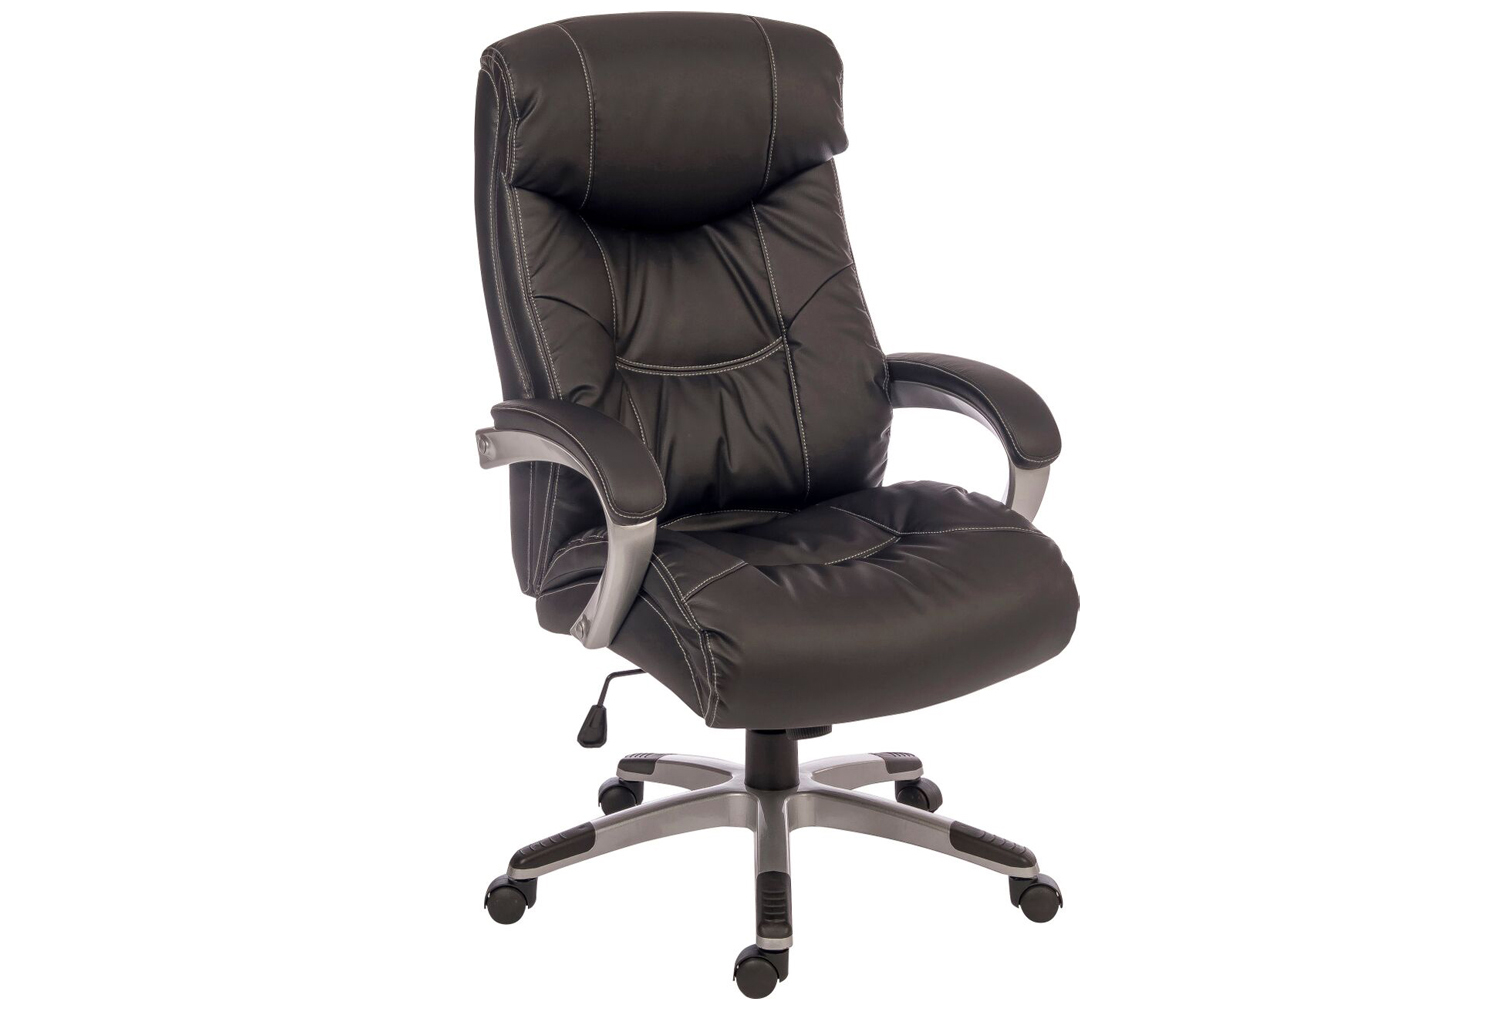 Winberg Executive Leather Look Office Chair, Black